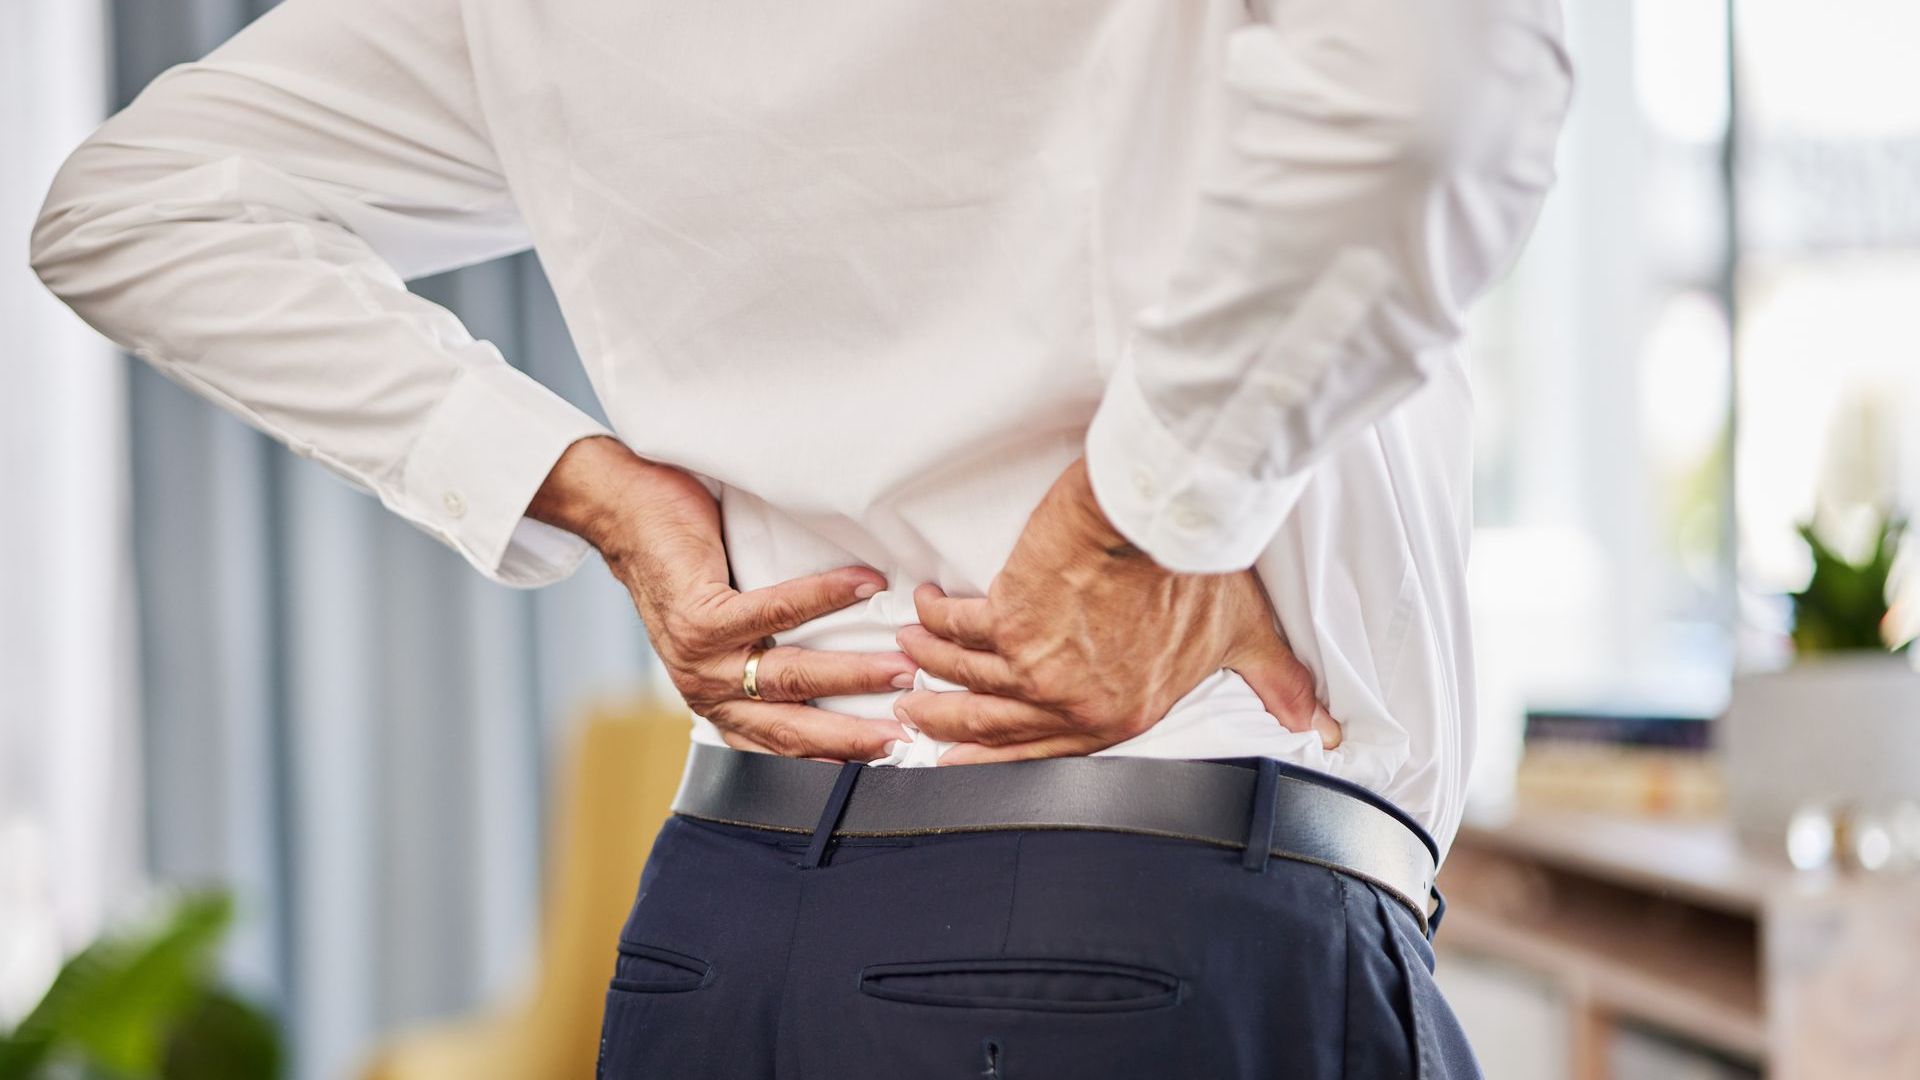 Close up image of a man's lower back. He is holding his back in pain. The man wears a white shirt and blue trousers with a black belt. He is wearing a wedding ring. 